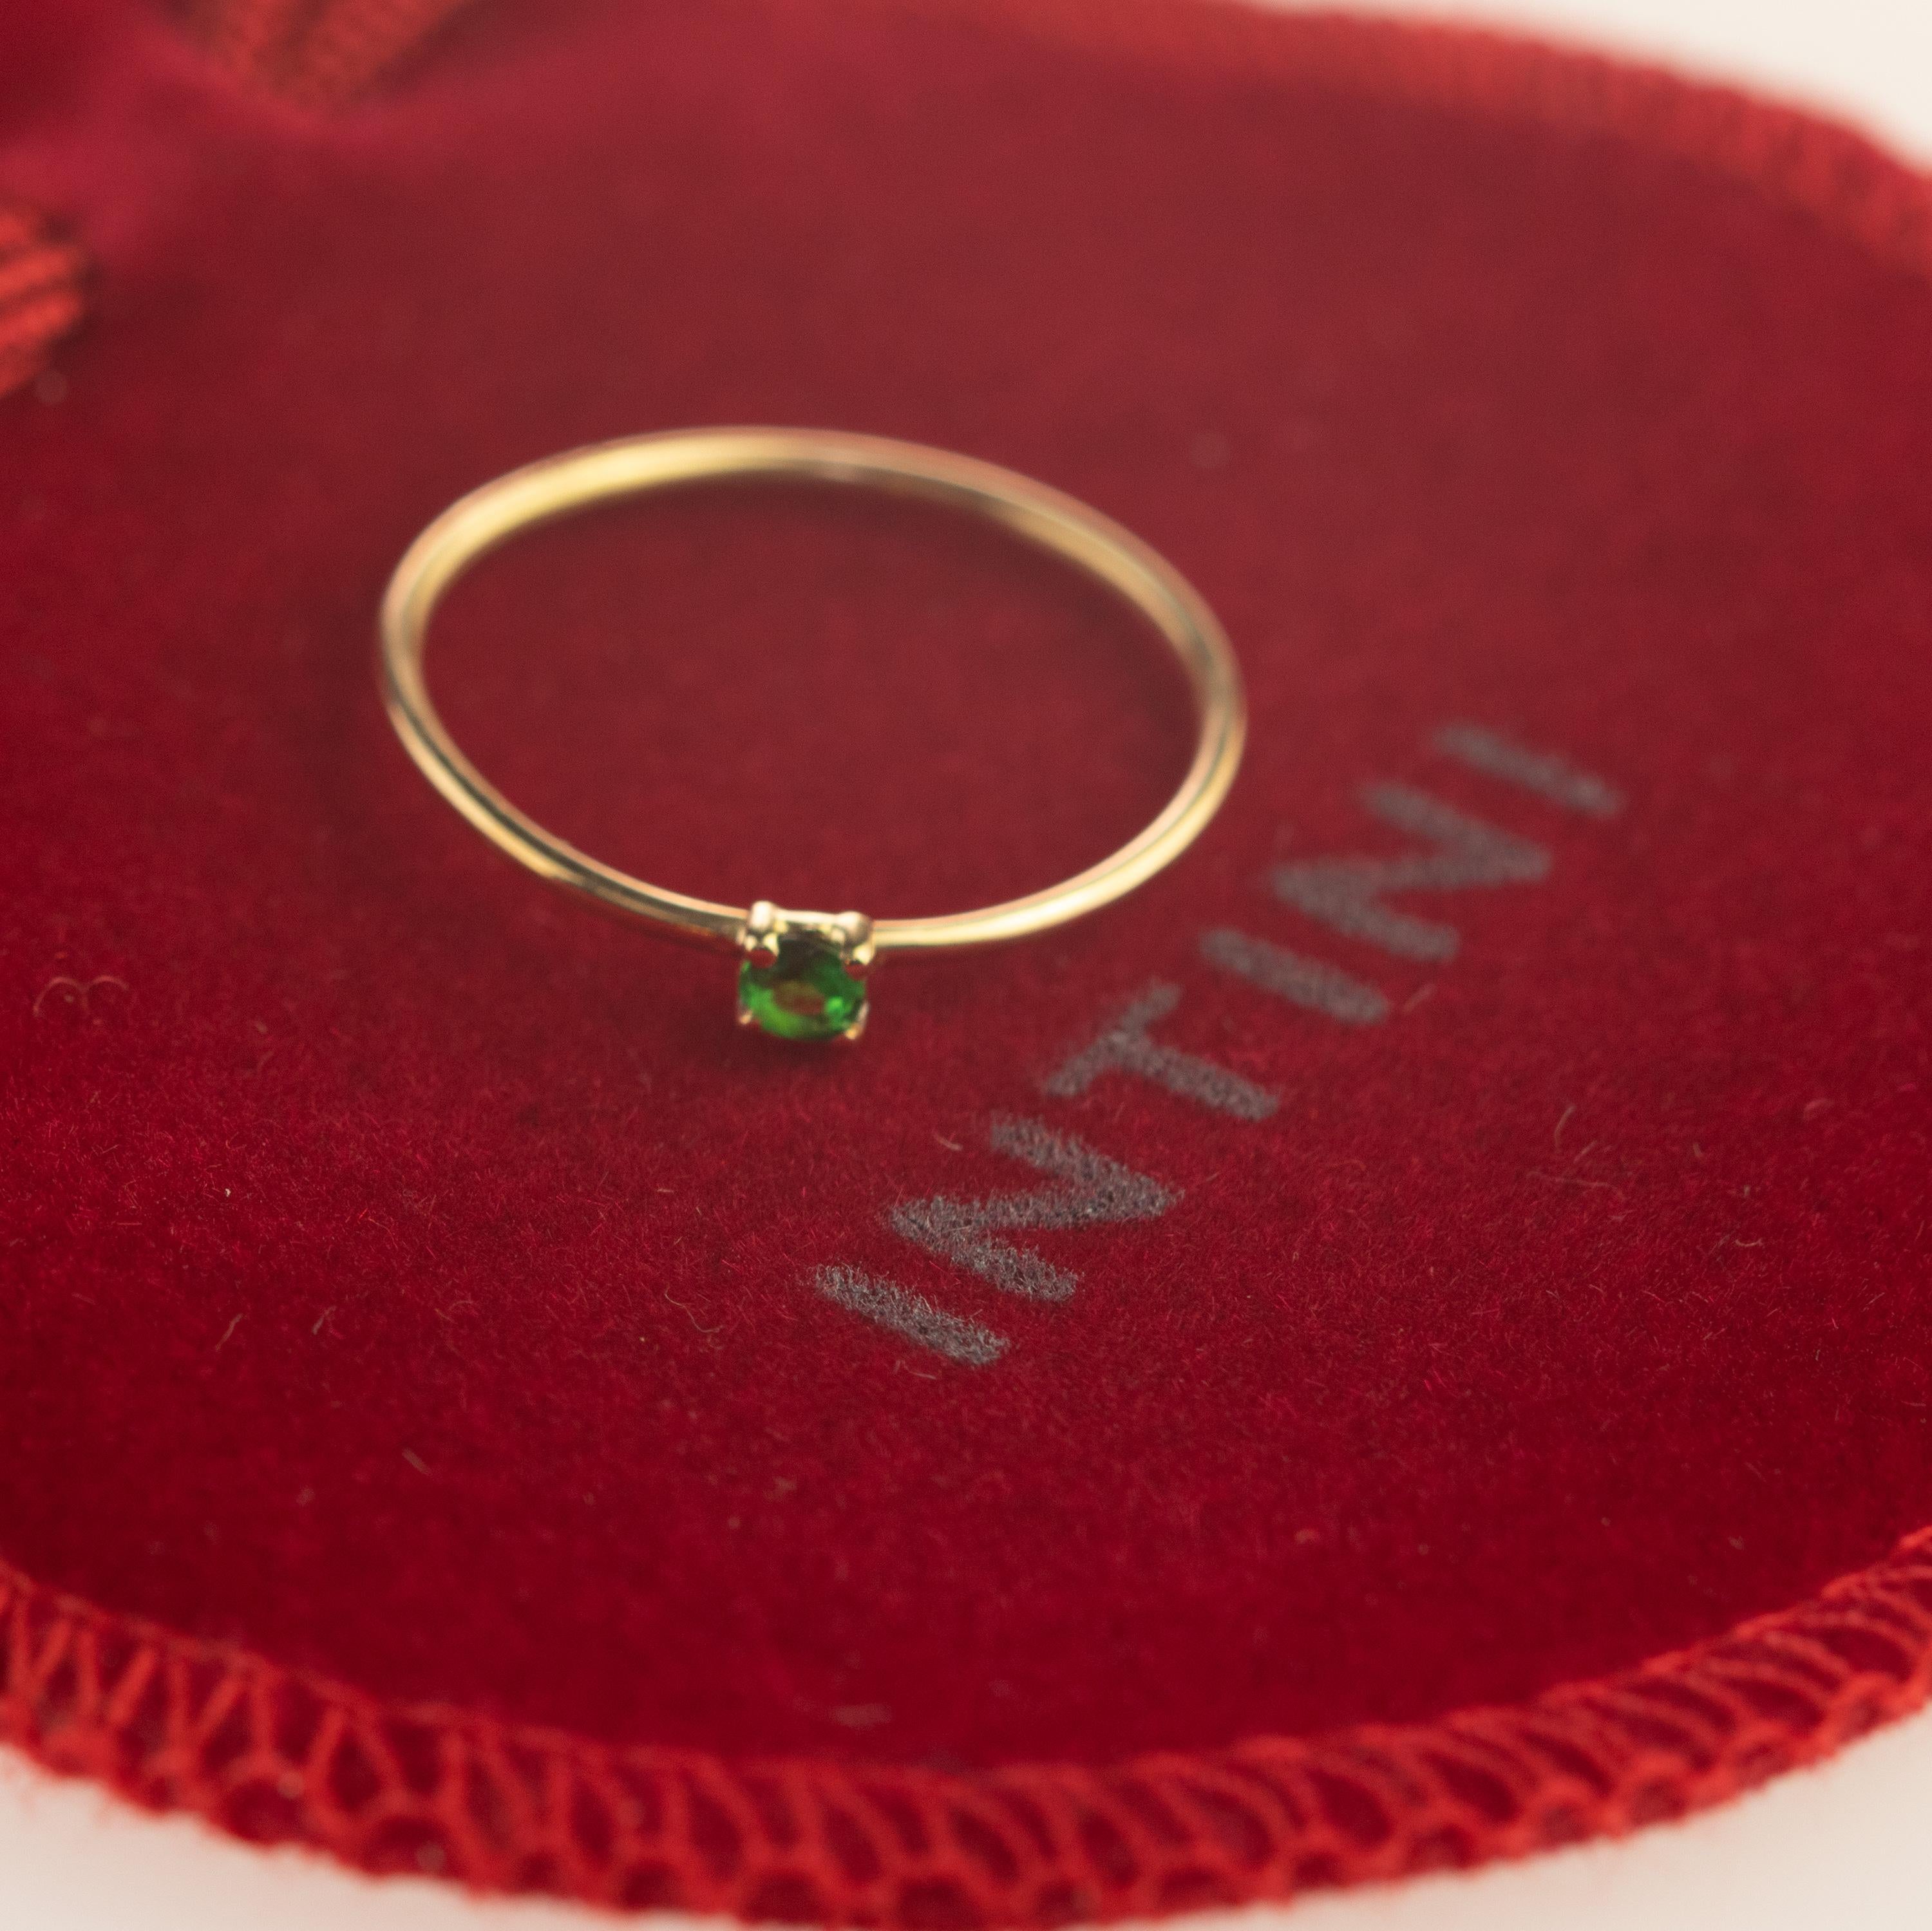 Magnificent ring with an exceptional art work, outstanding display of color and Italian craftsmanship designed by Intini Jewels. This unique ring has a natural round tsavorite over a 18 karat yellow gold cocktail design. Brilliant cut solitaire ring